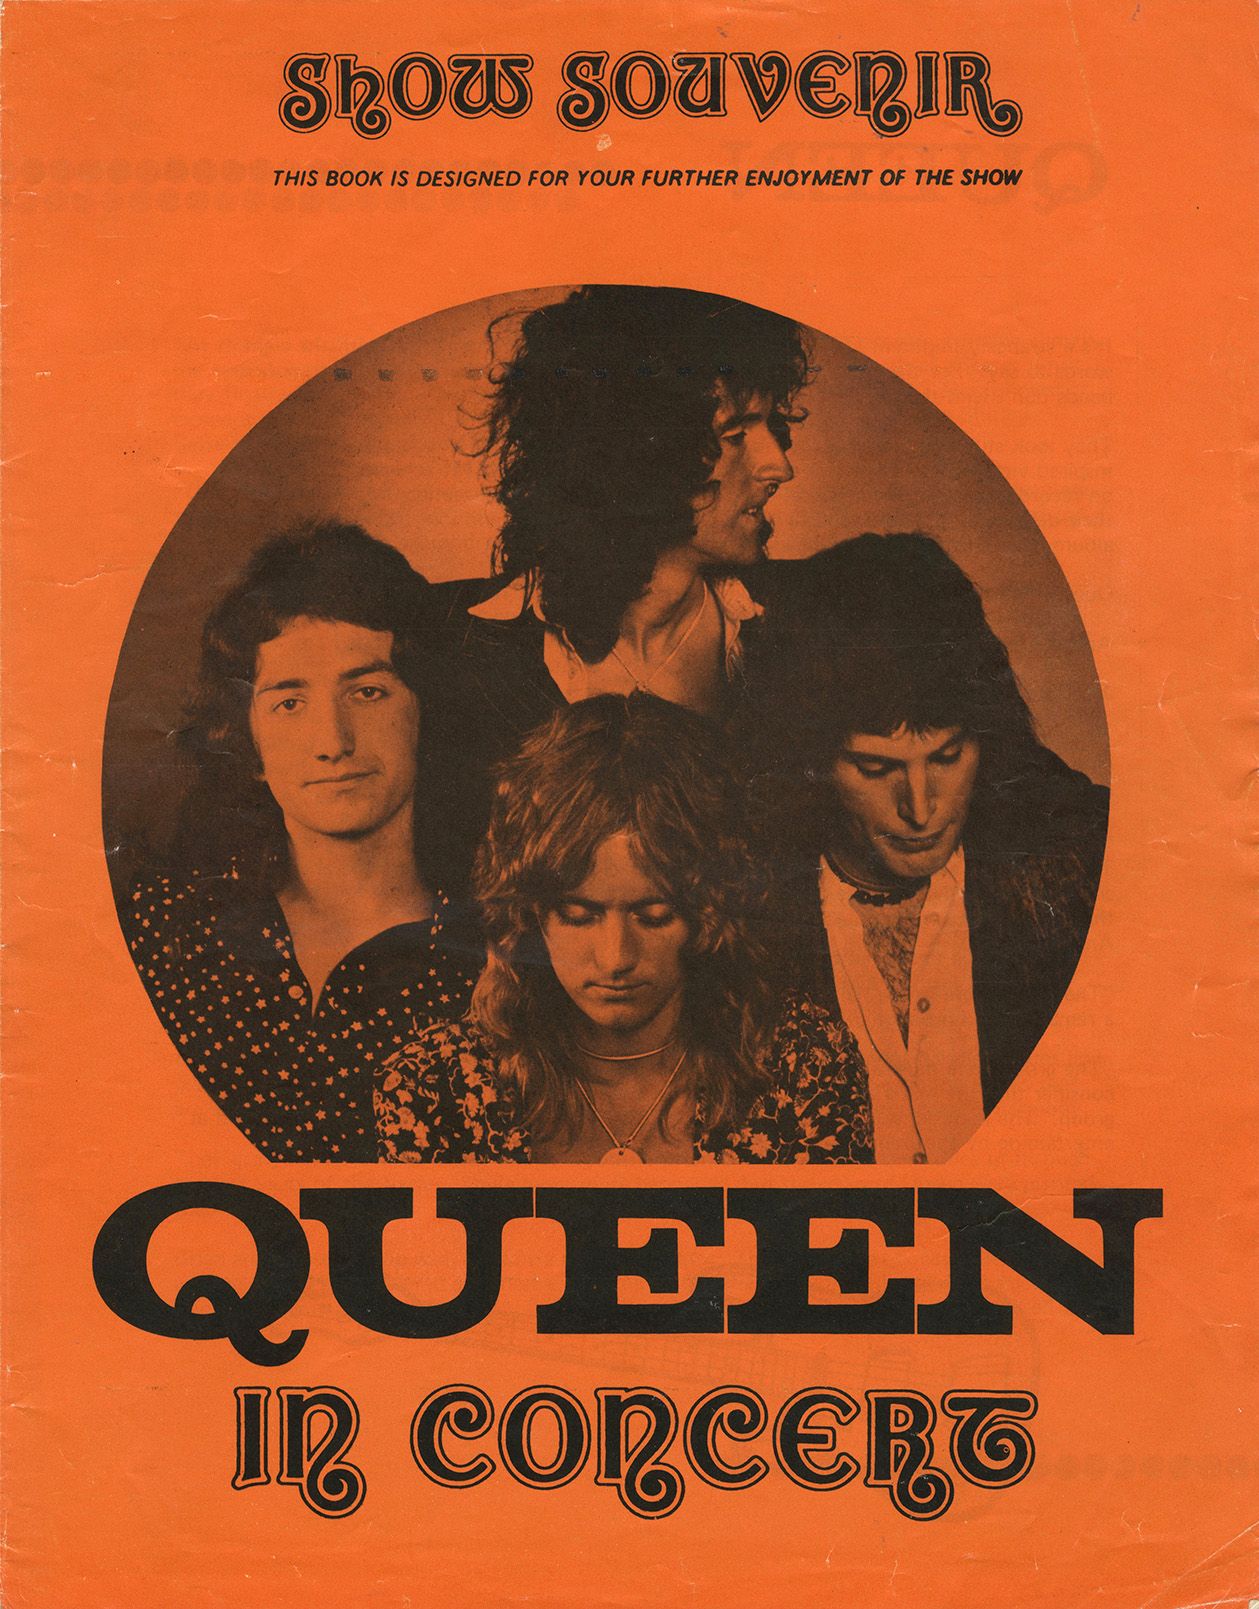 Early Queen show souvenir - orange without photo (UK)